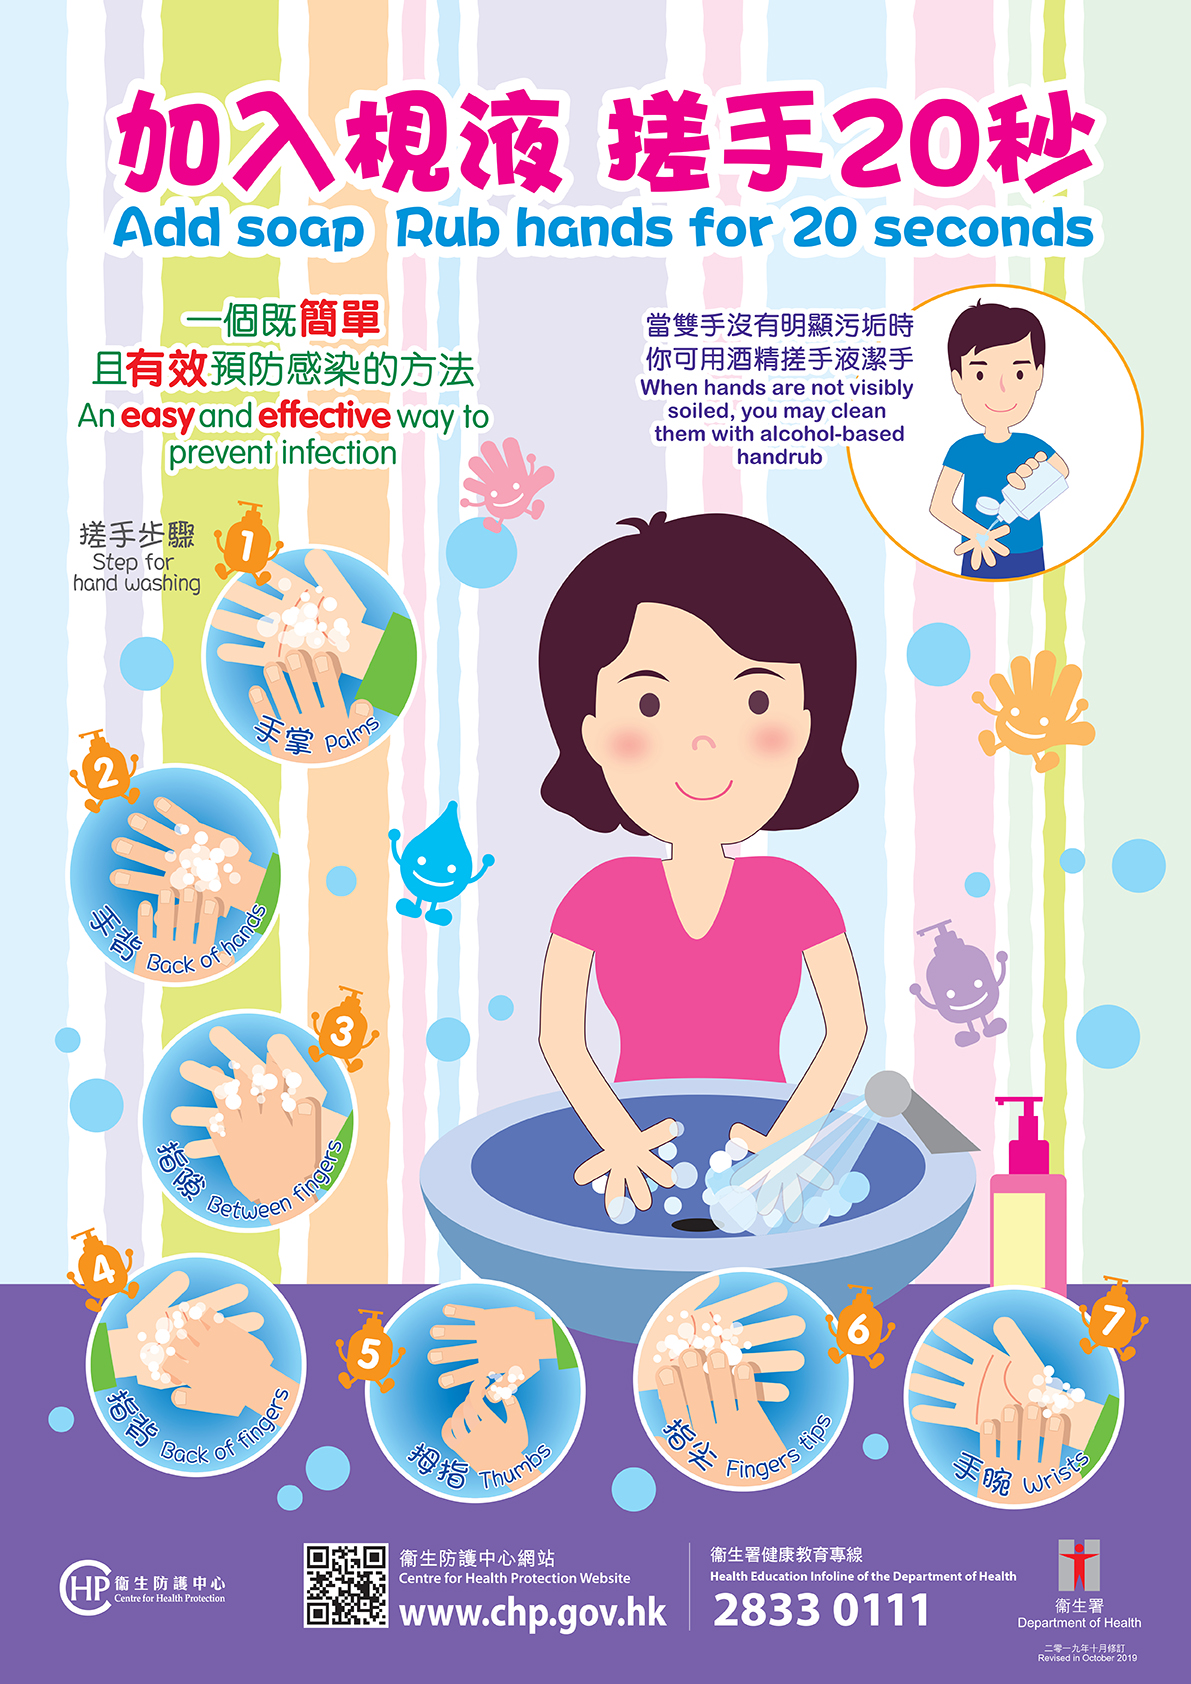 Add soap Rub hands for 20 seconds: Step for hand washing